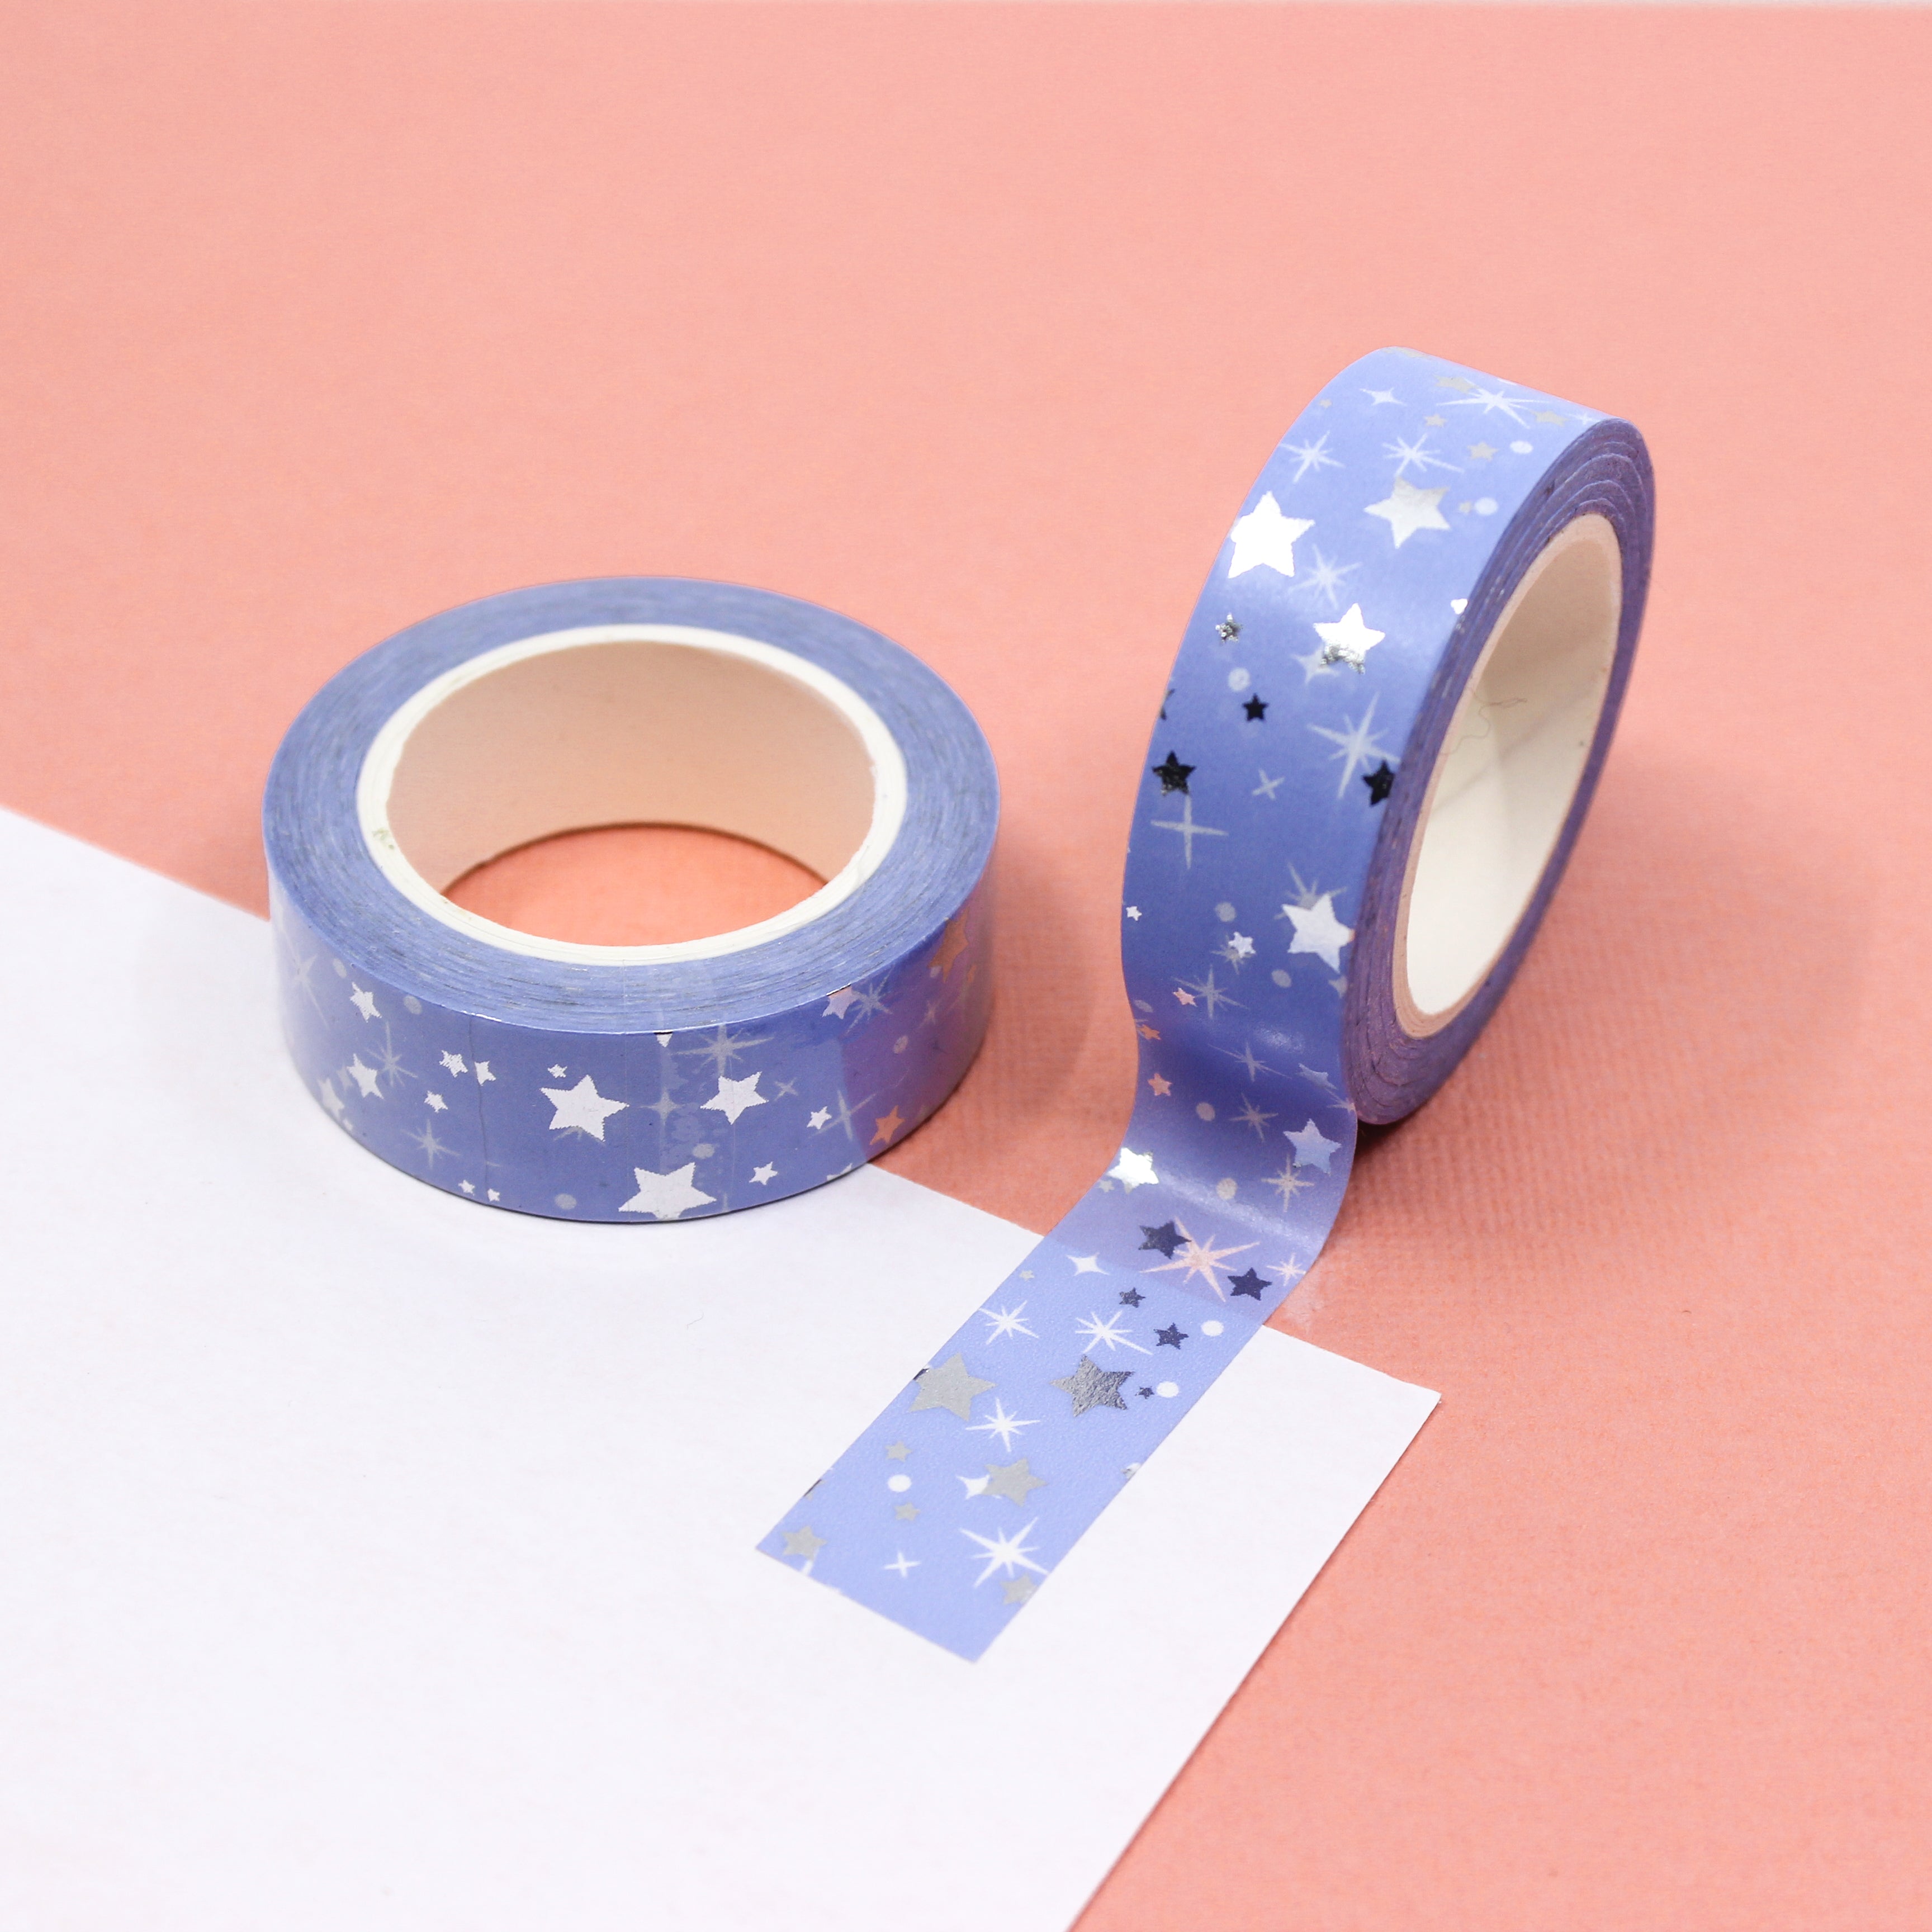 Elevate your crafts with our Blue Silver Foil Stars Washi Tape, featuring a celestial design with shimmering silver foil stars against a rich blue background. Ideal for adding a touch of cosmic elegance to your projects. This tape is sold at BBB Supplies Craft Shop.